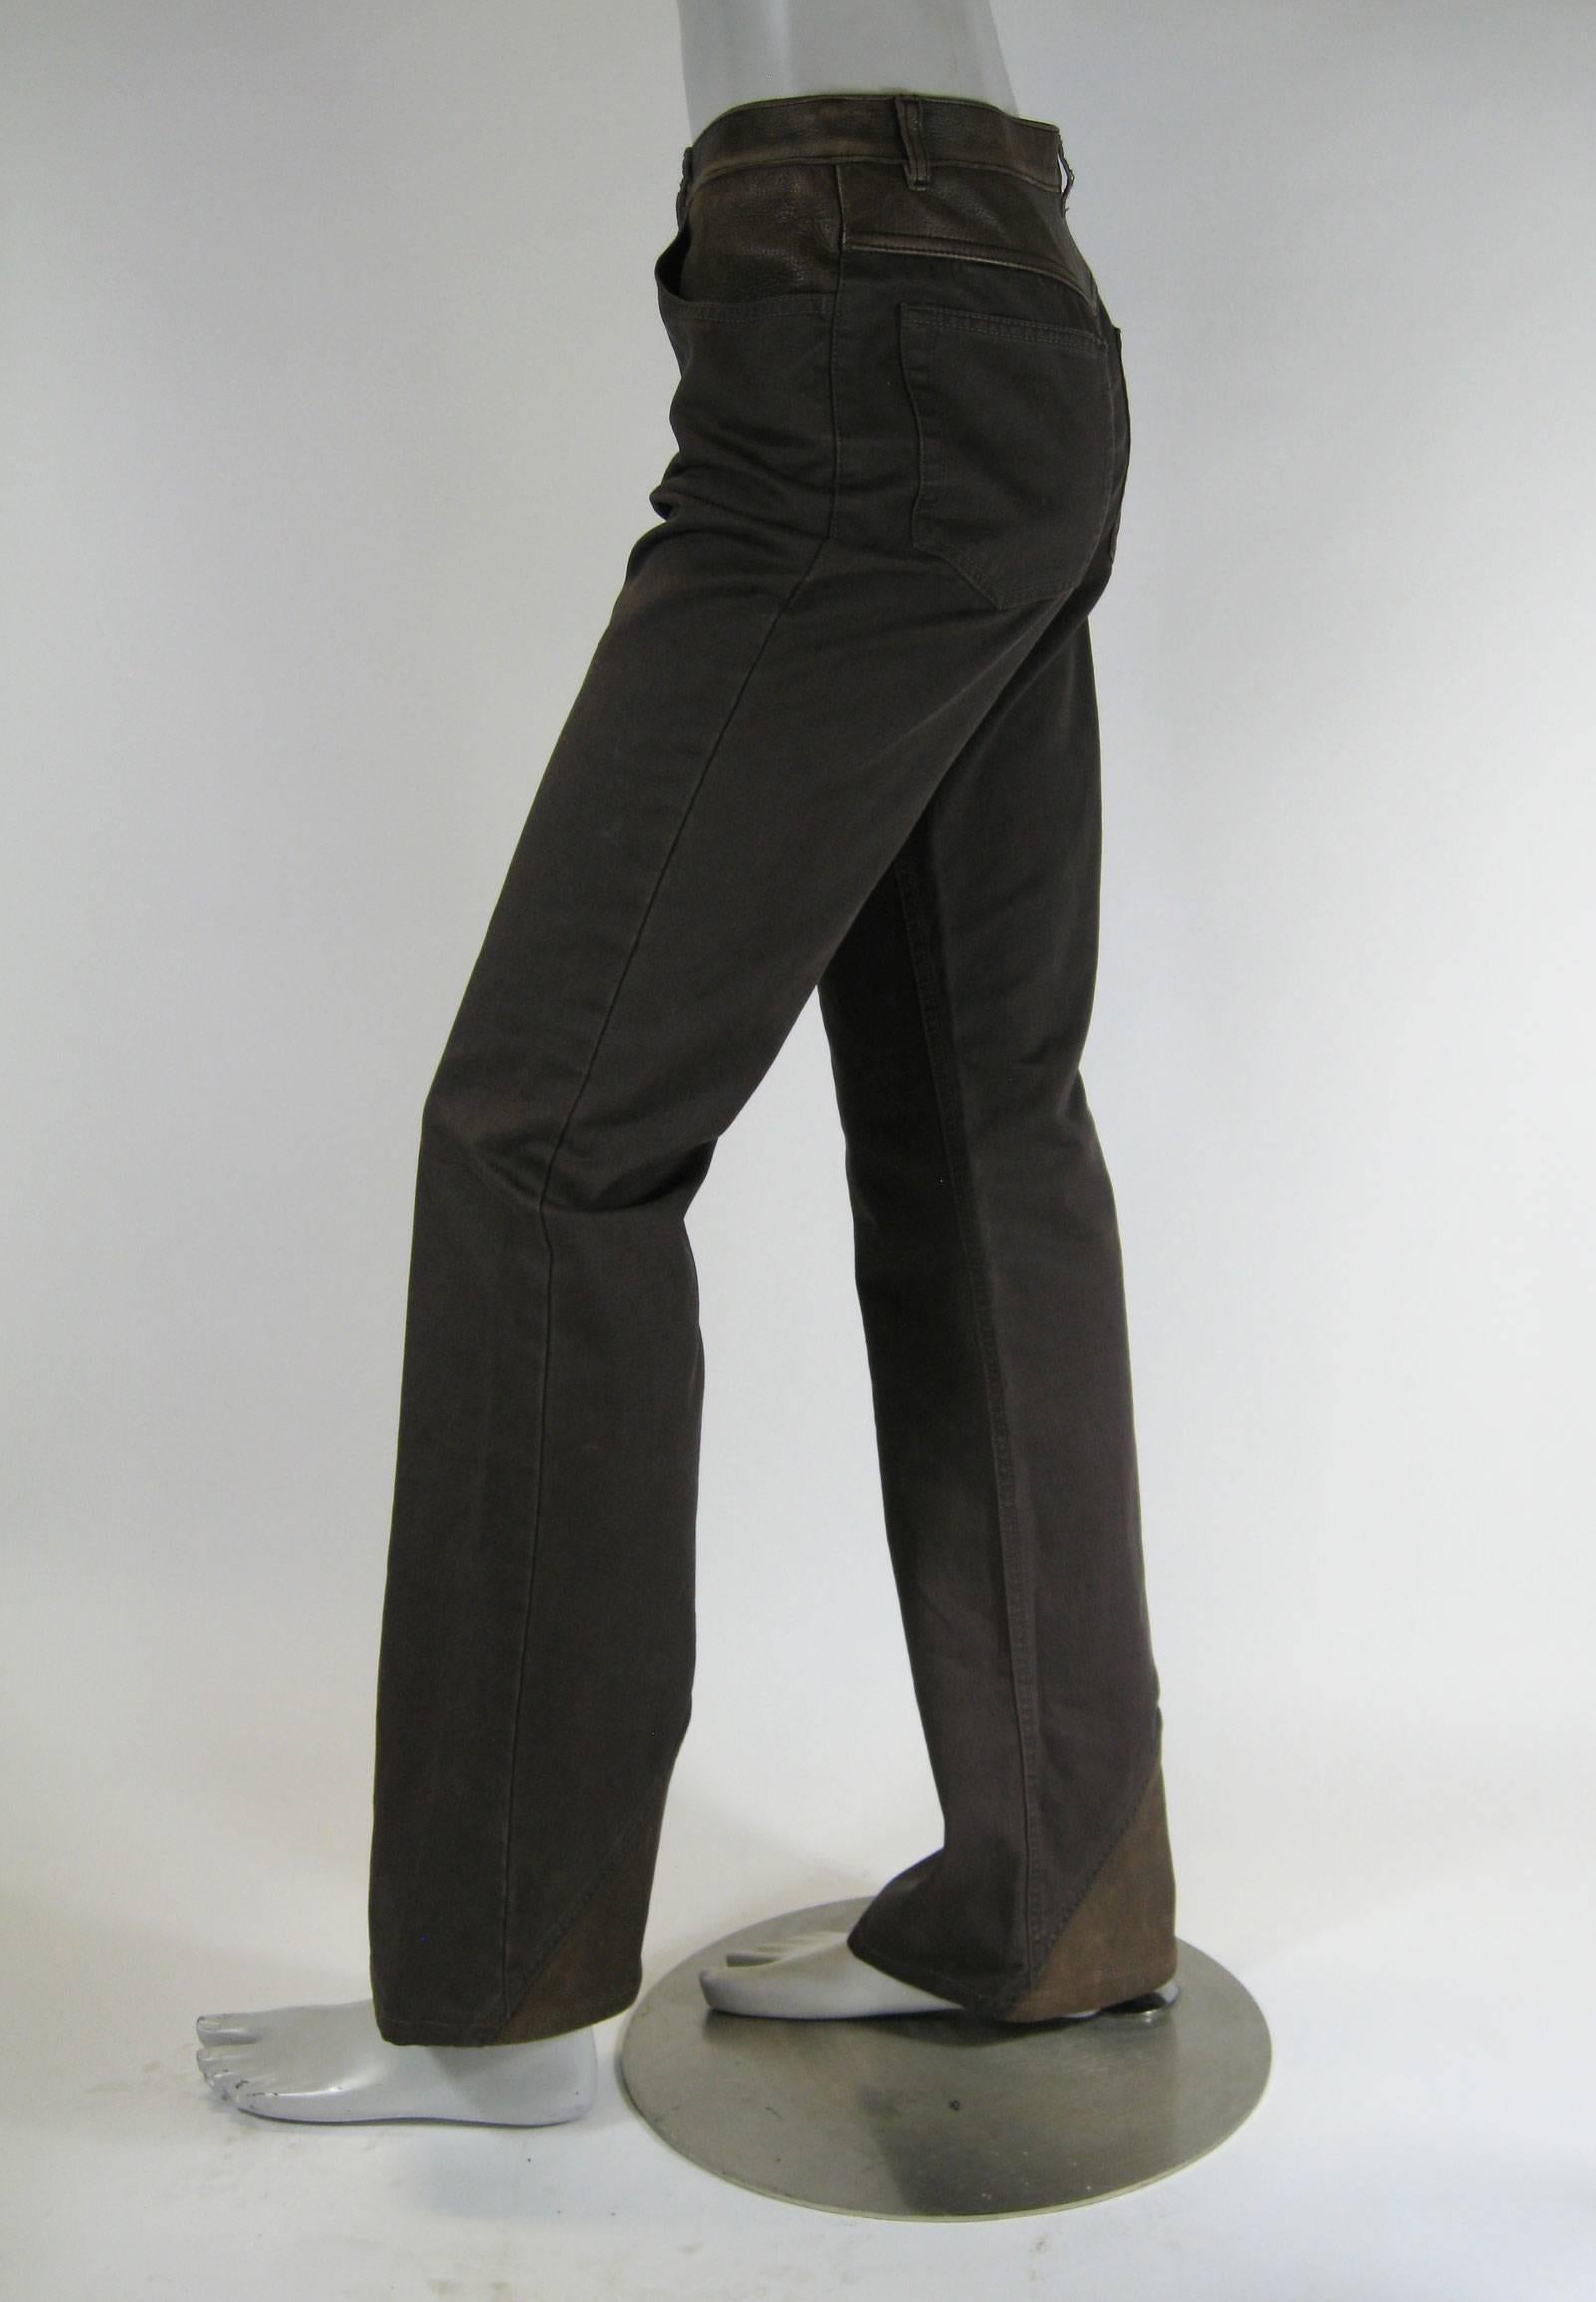 Women's Chanel Brown Denim and Leather Pants